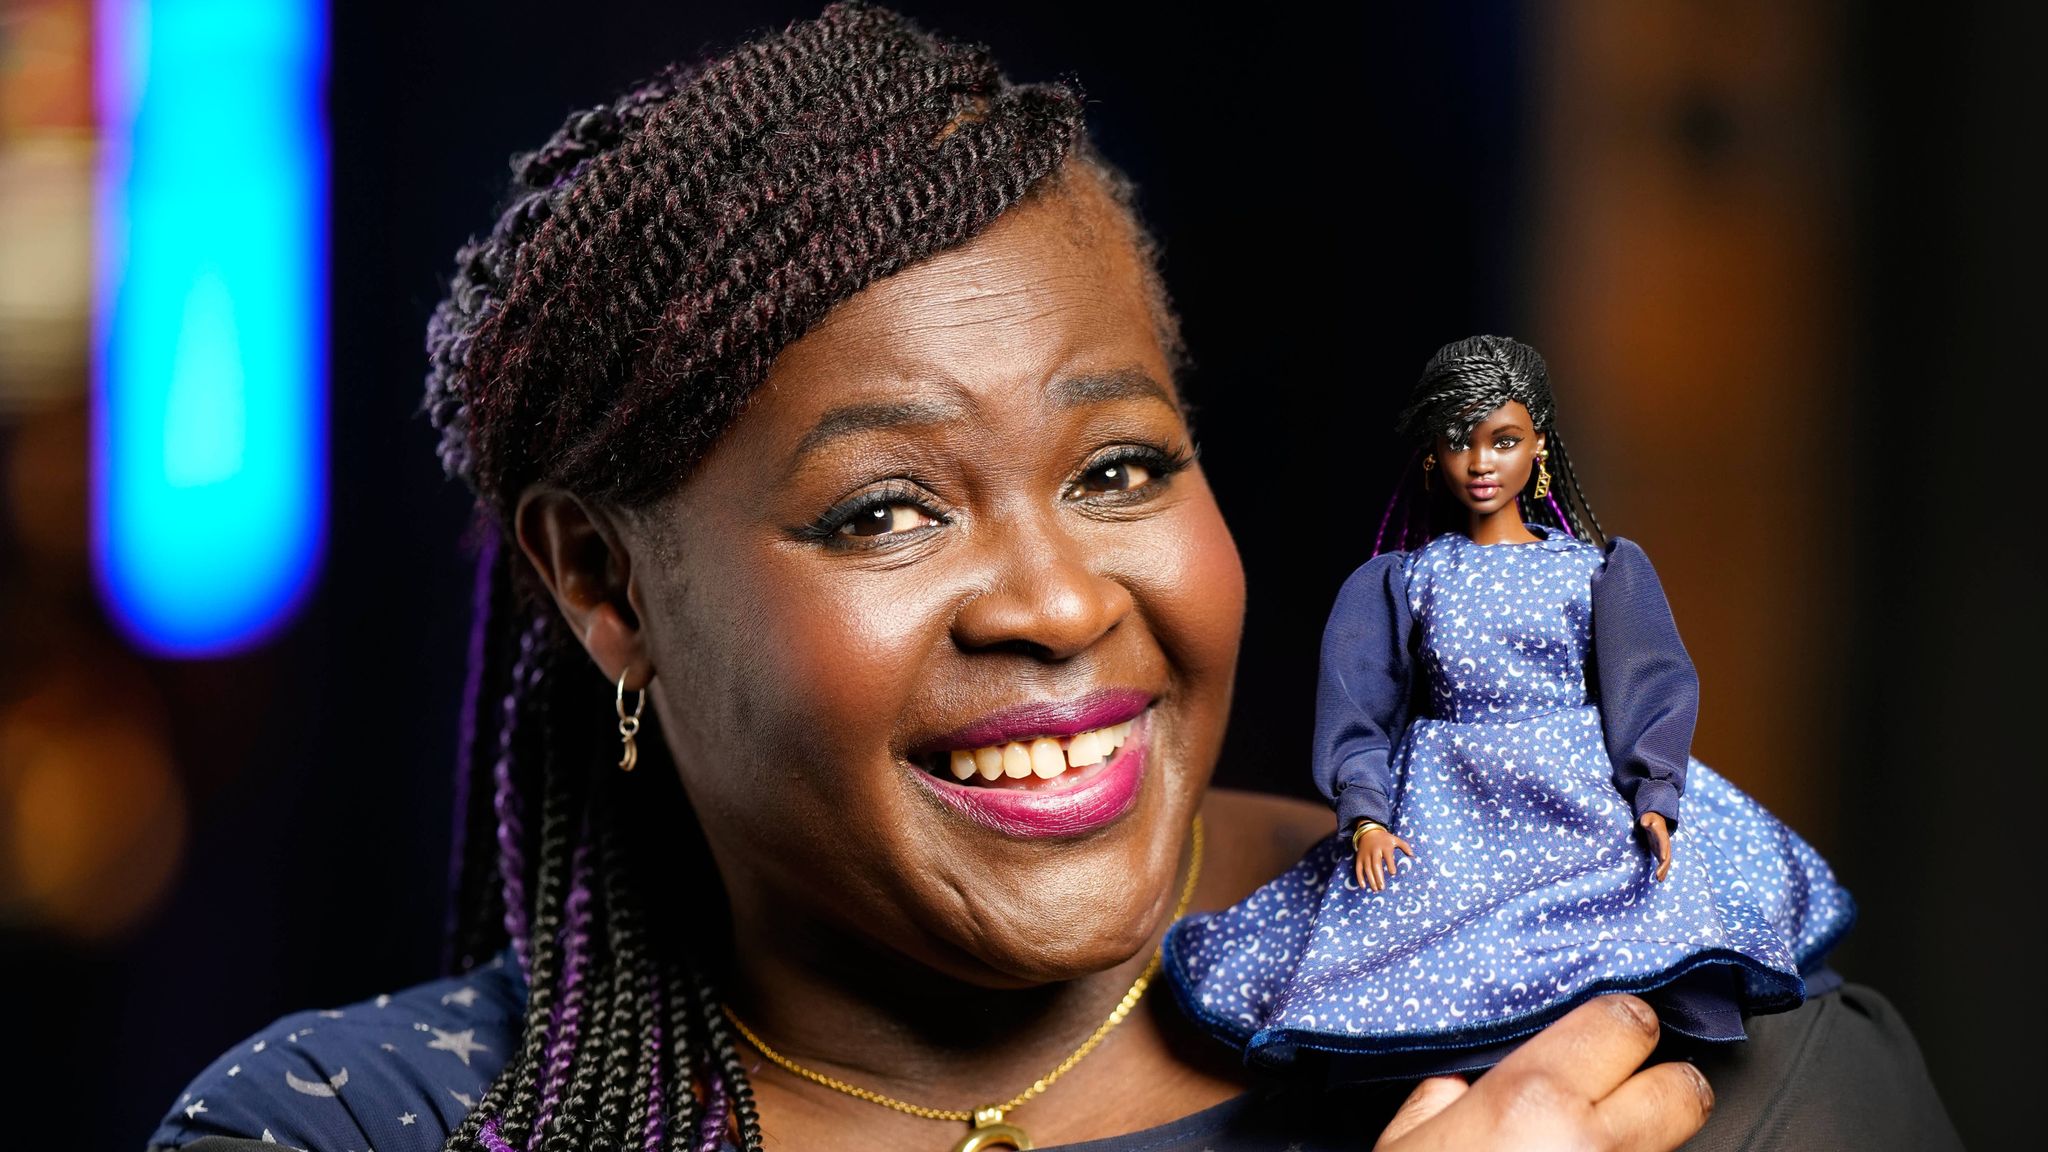 Black doctor has one-of-a-kind Barbie doll made after her